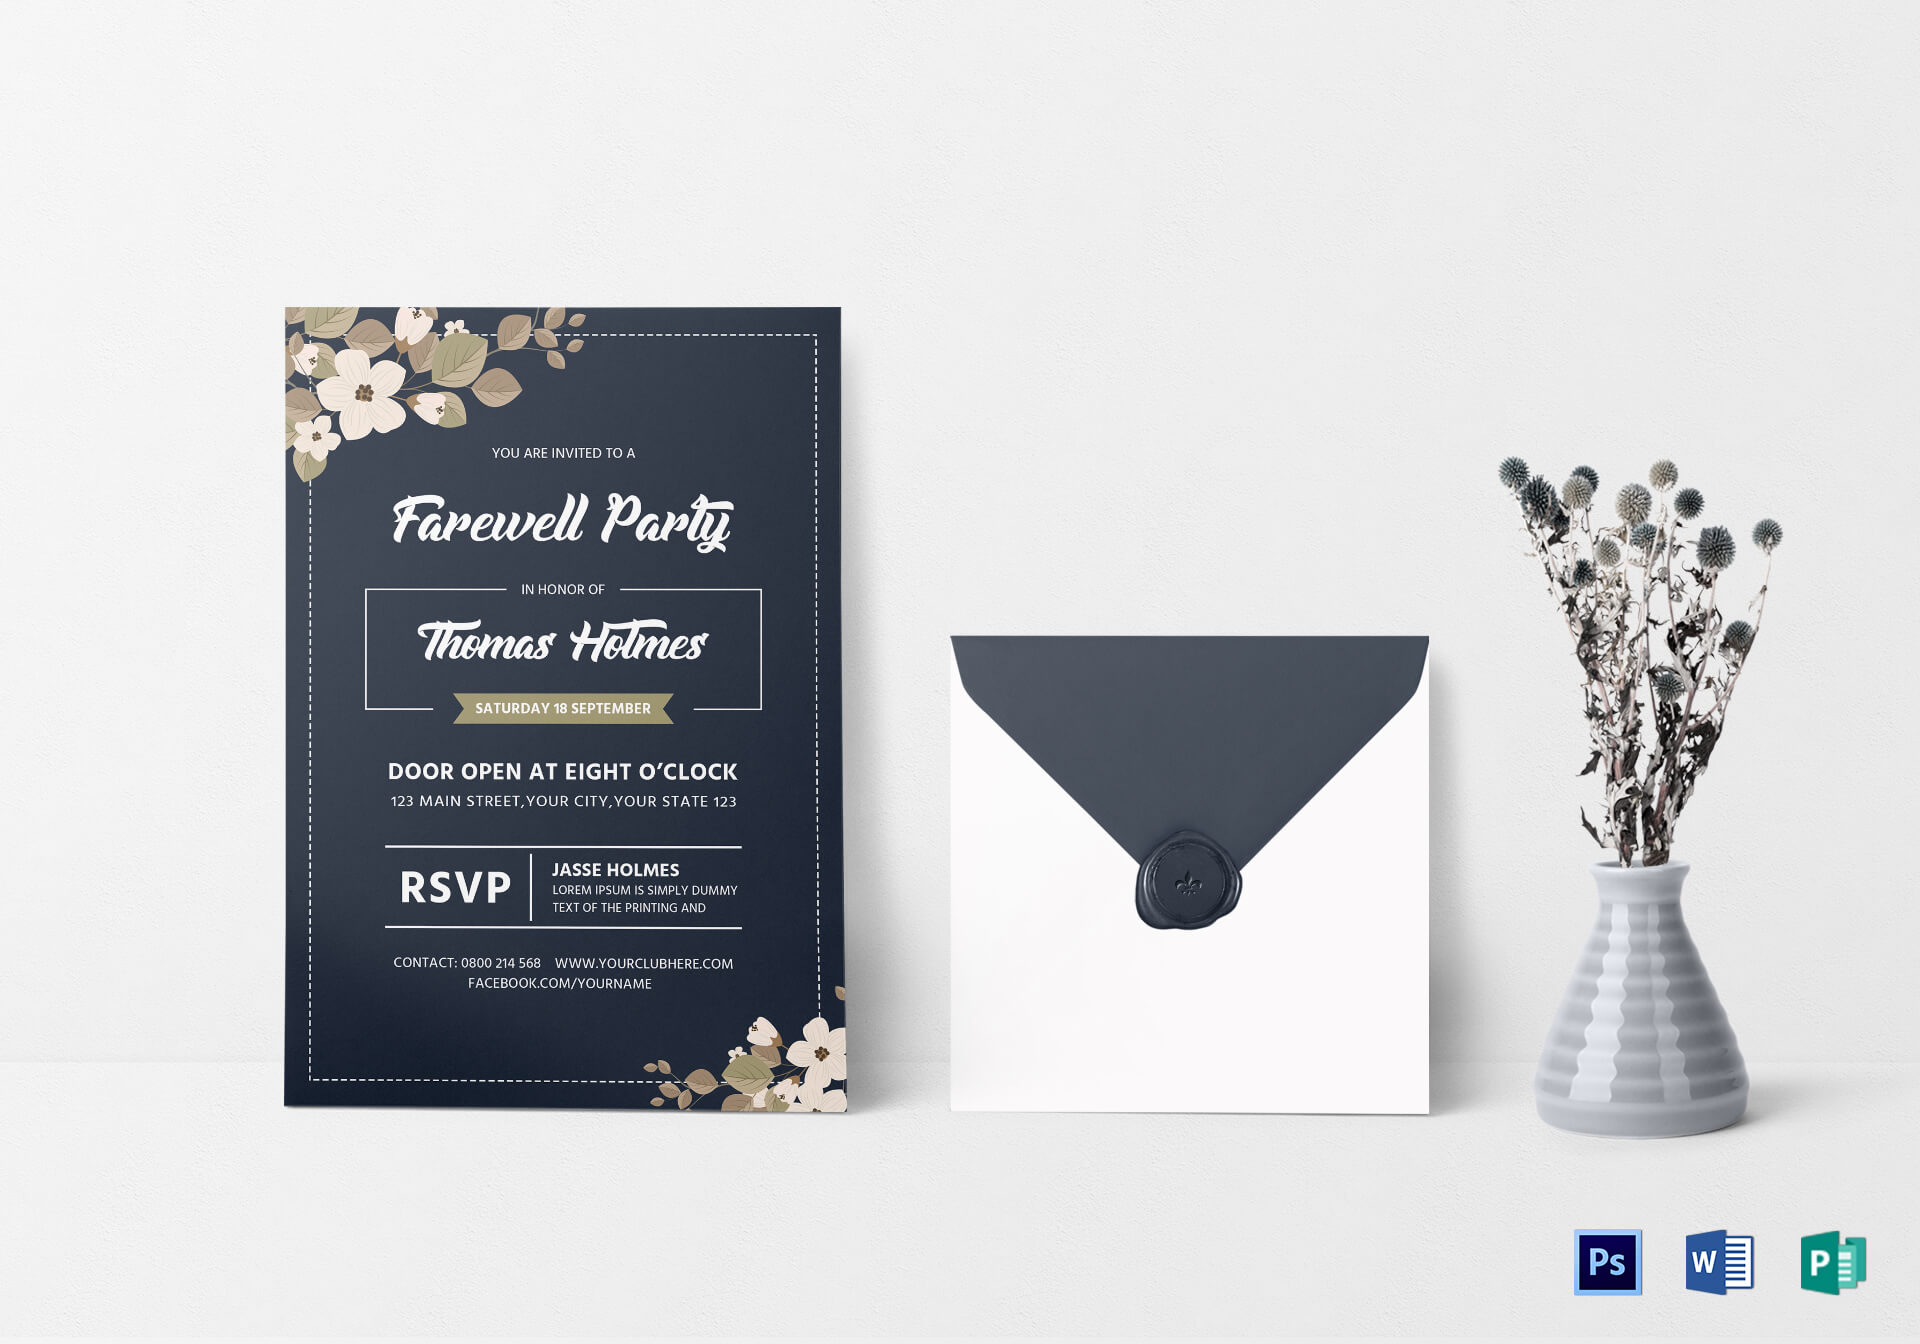 Farewell Party Invitation Card Template With Farewell Card Template Word